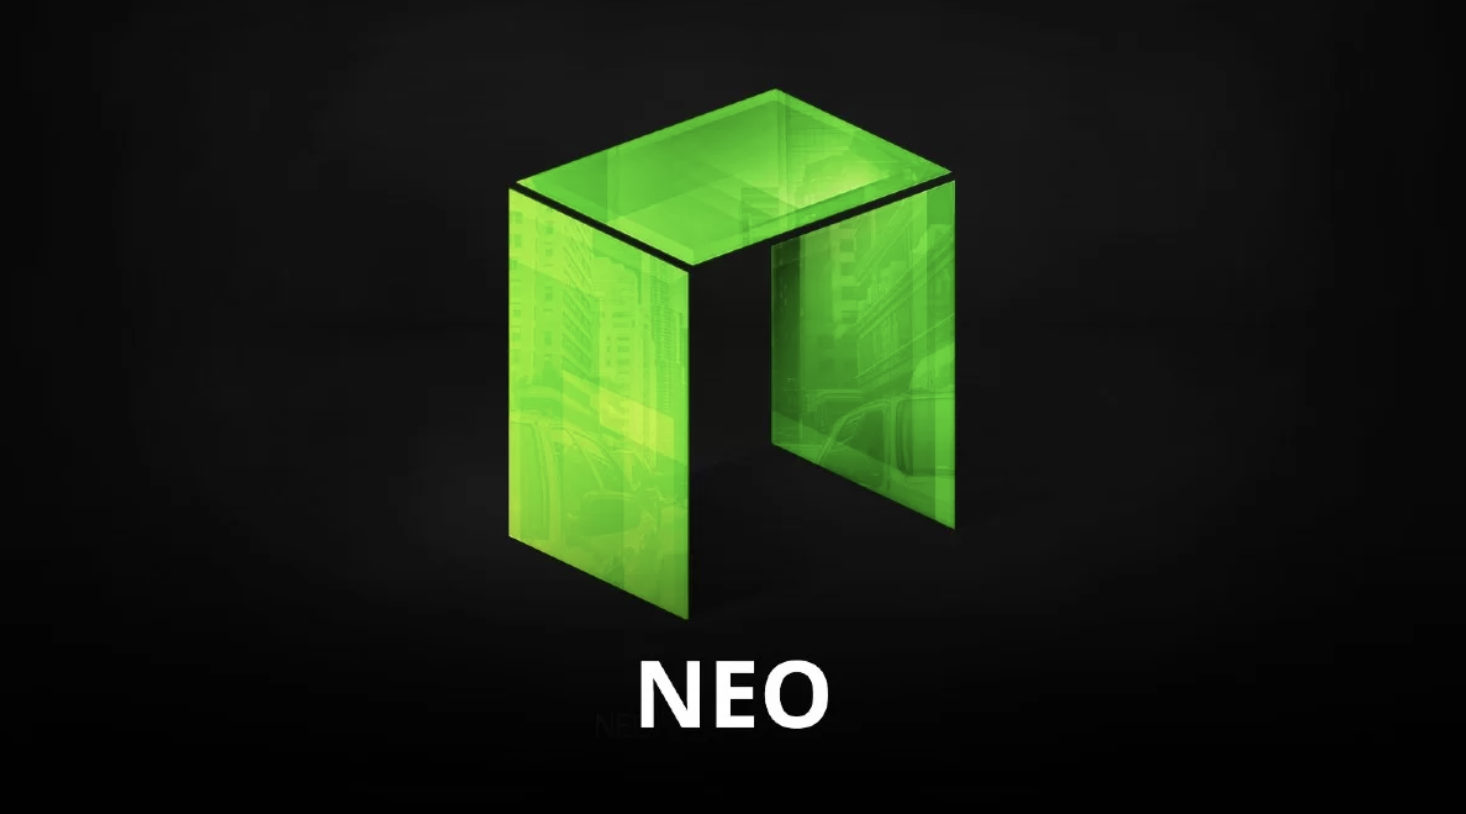 How to Buy NEO Coin?